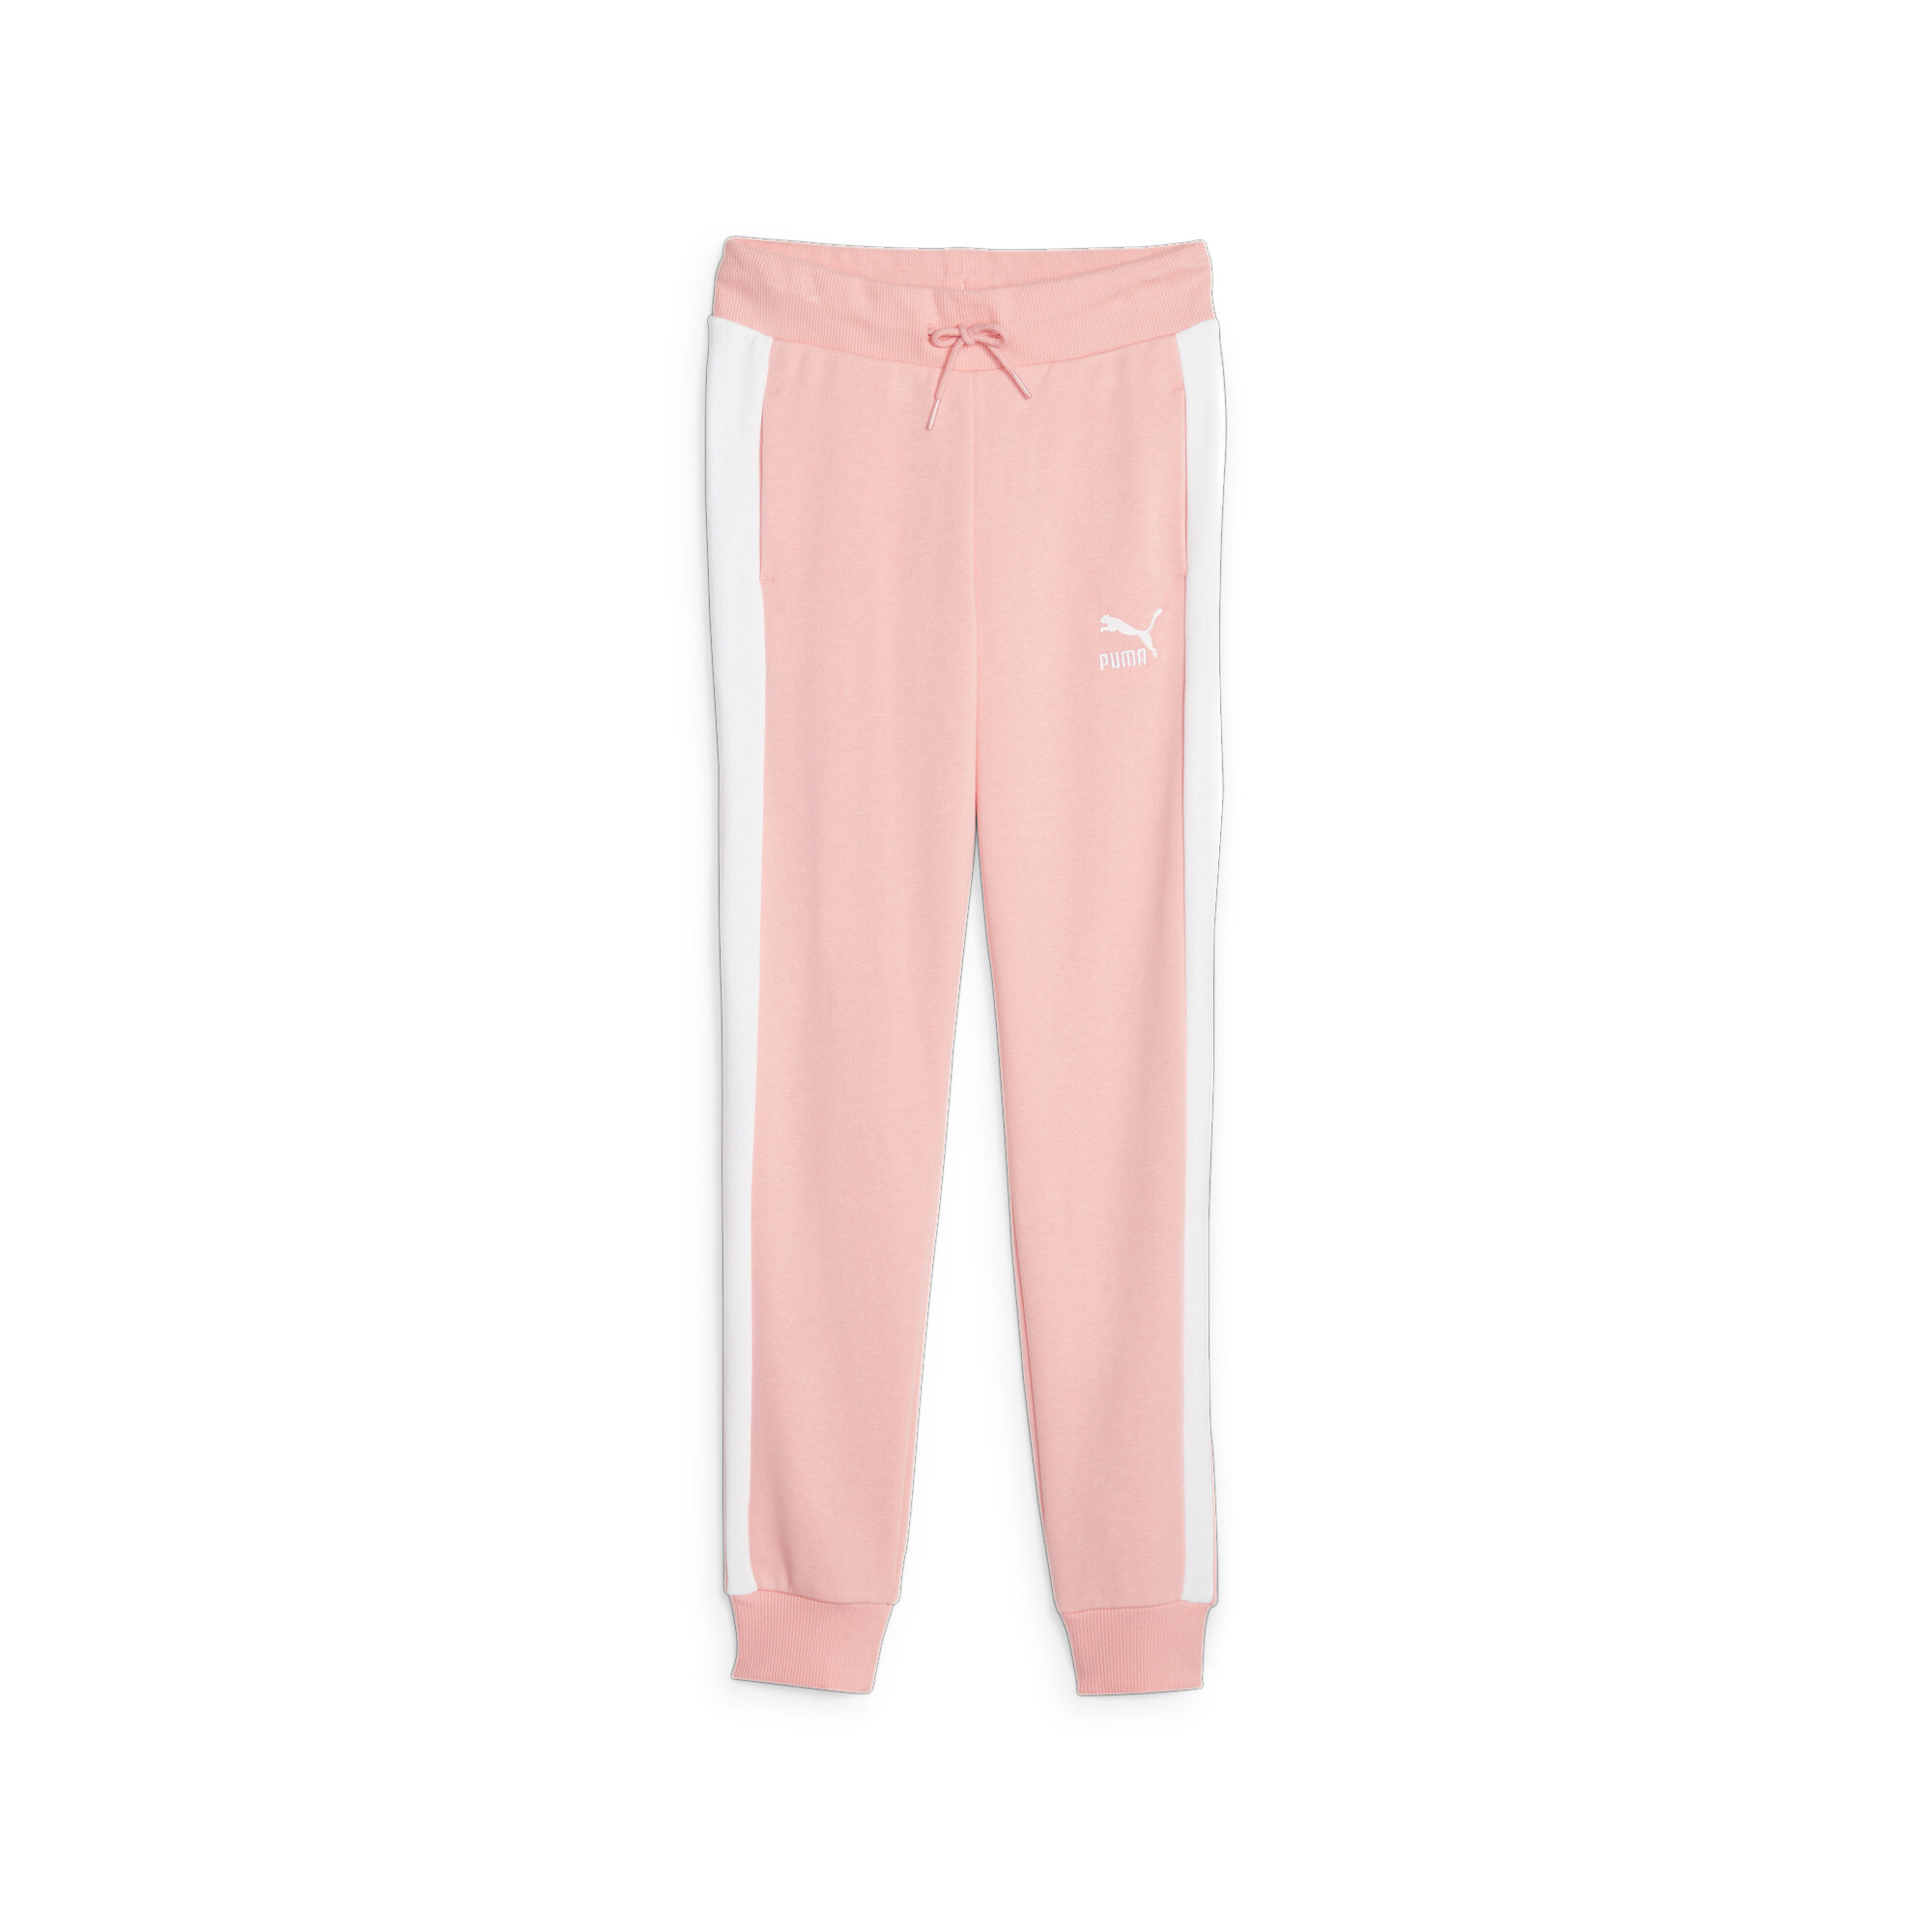 PUMA Classics T7 Track Pants In Pink, Size 13-14 Youth